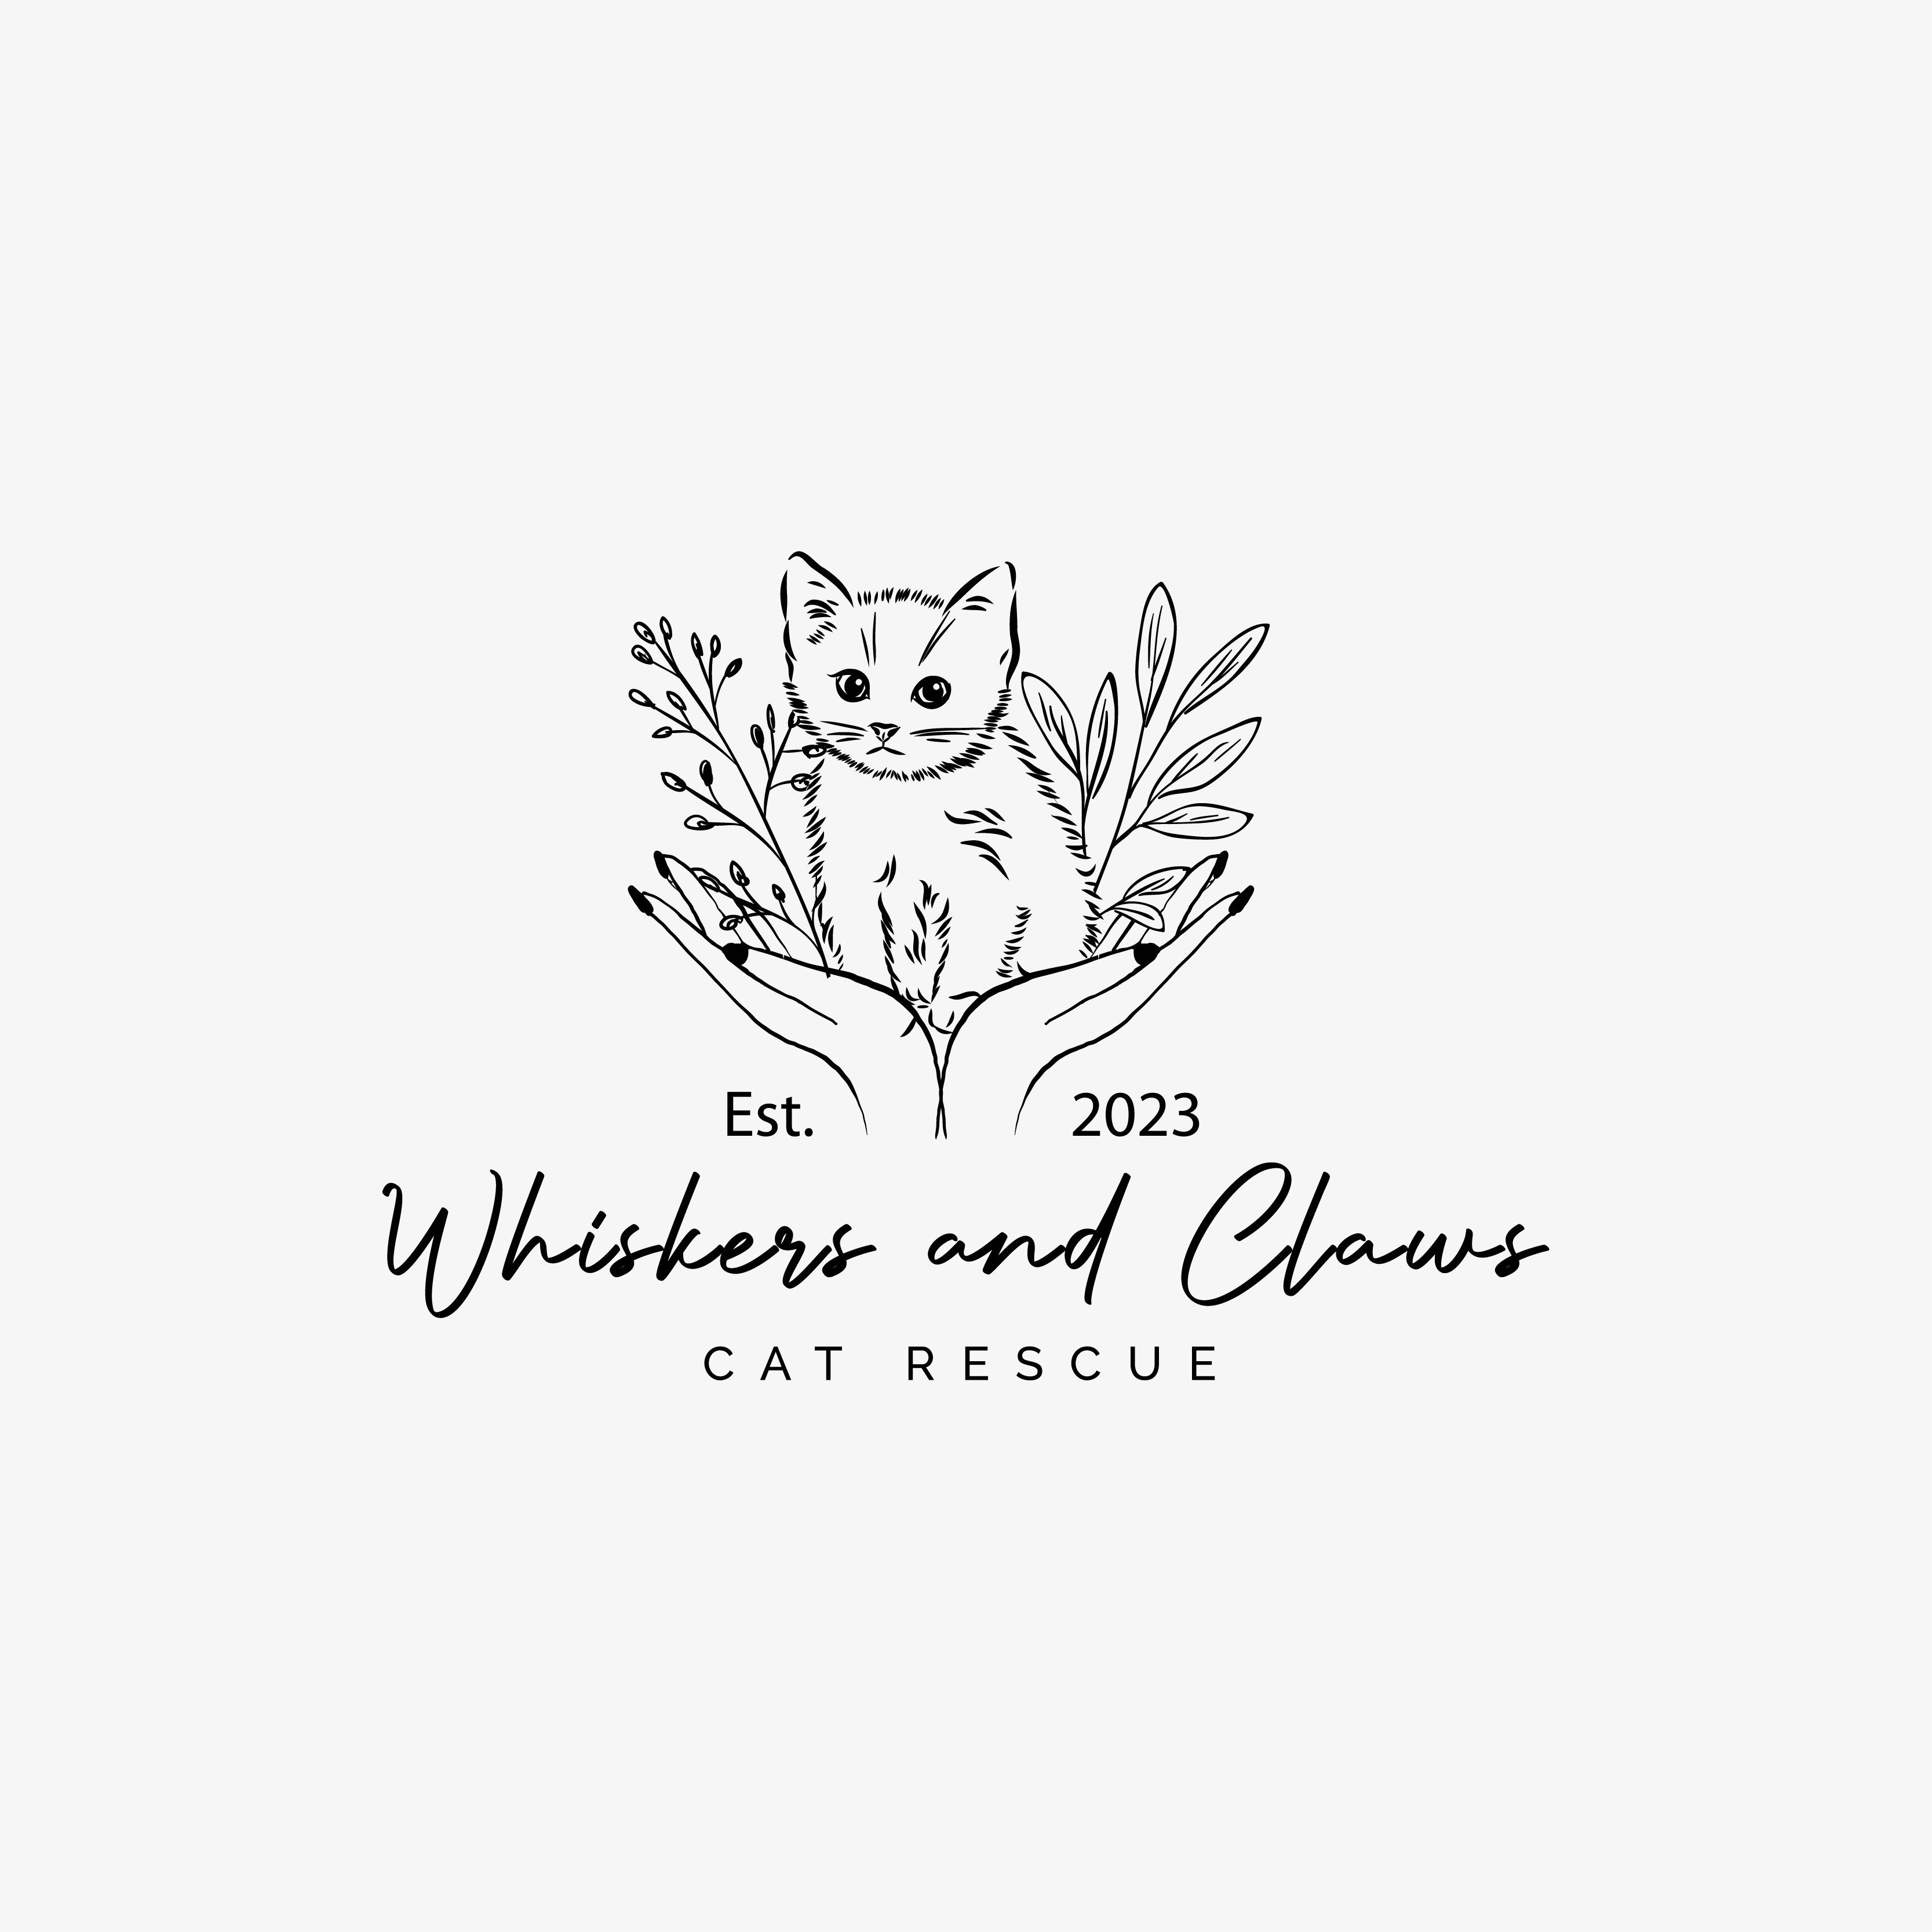 Whiskers and Claws Cat Rescue